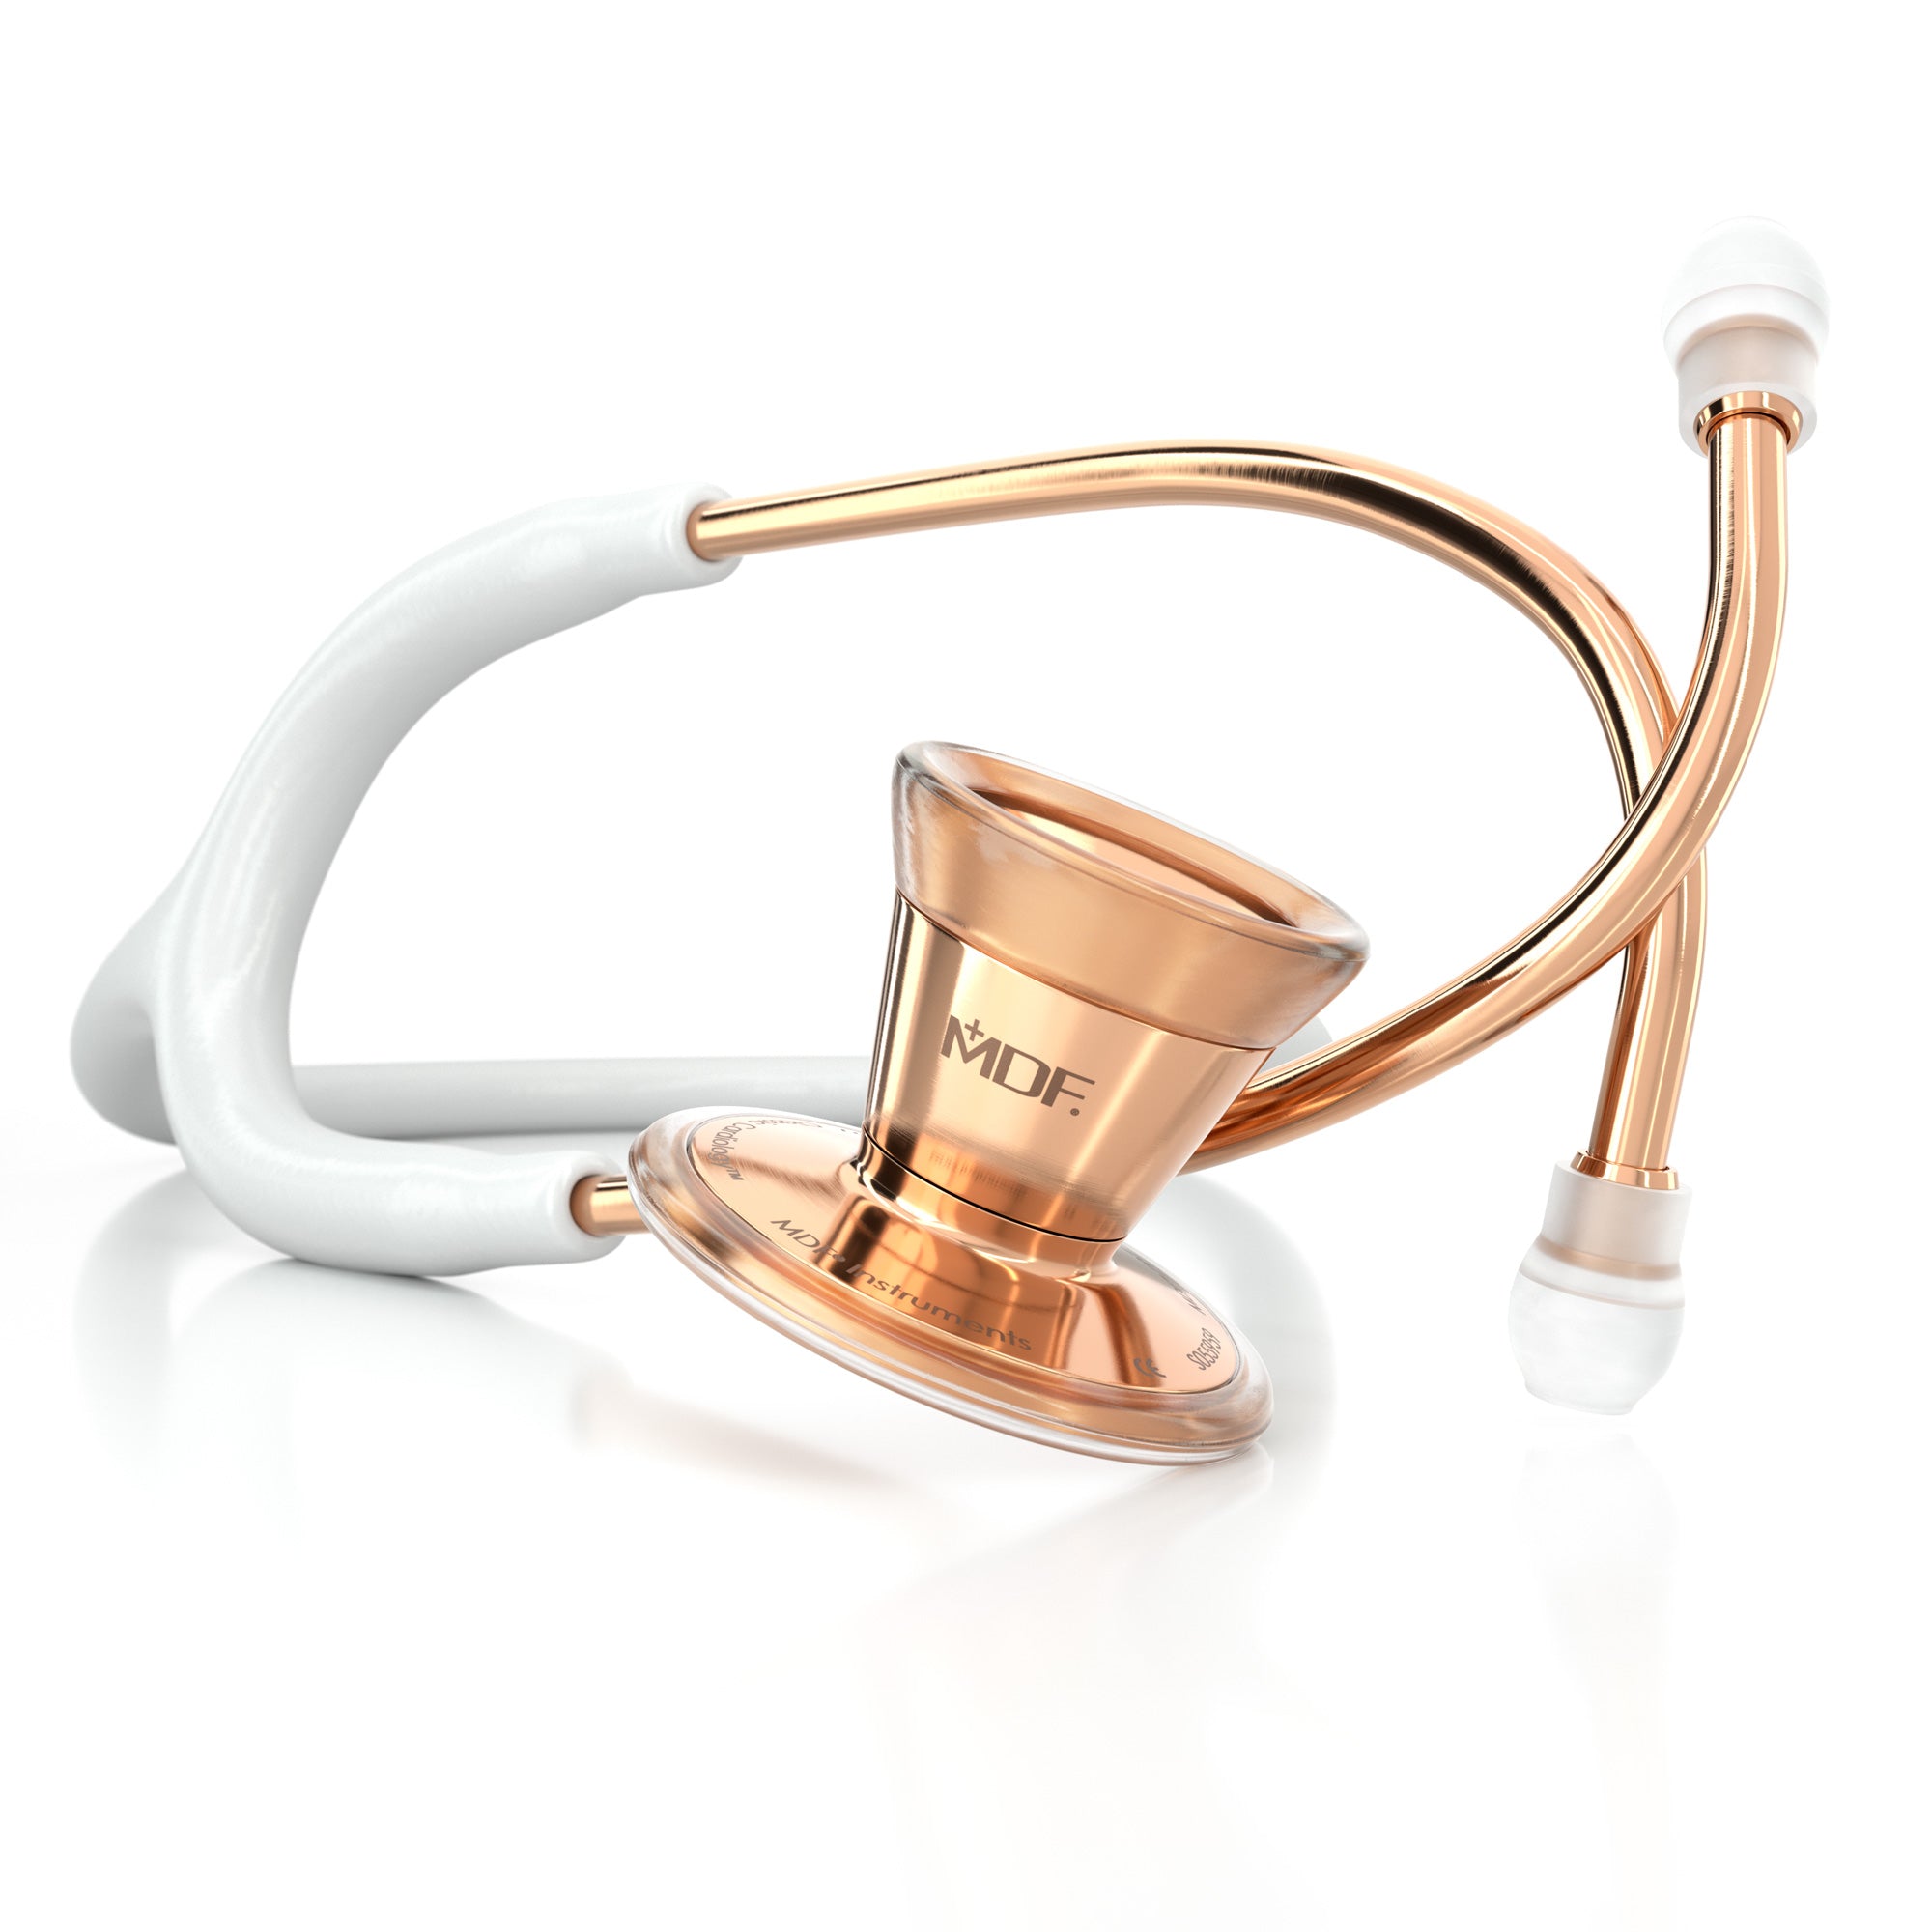 Rose Gold Stethoscope MDF Instruments ProCardial Stainless Steel Cardiology BlaBlanc White